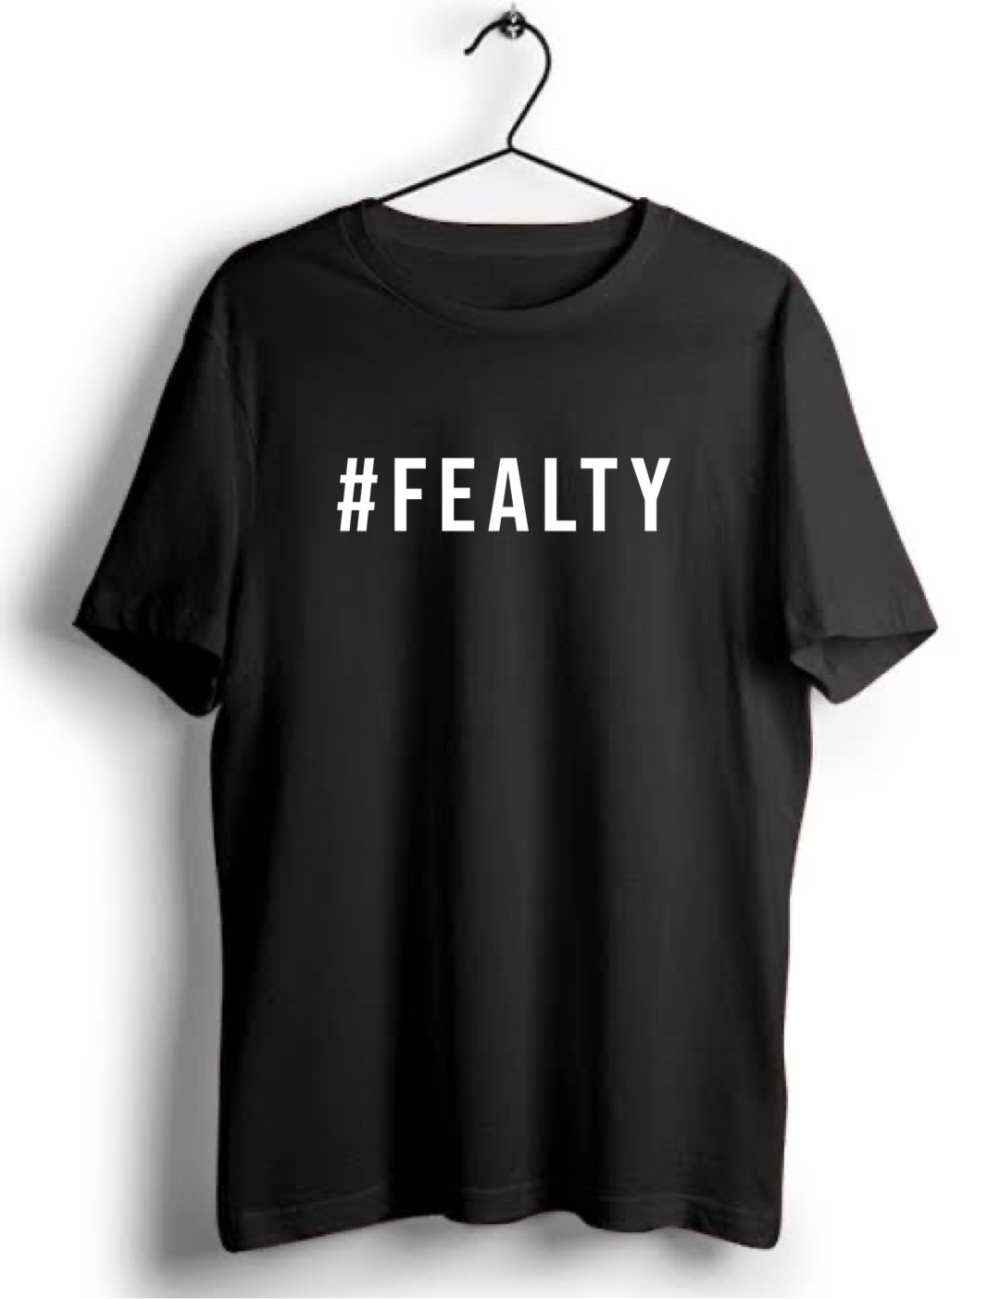 Fealty Hashtag Printed T shirts For Men